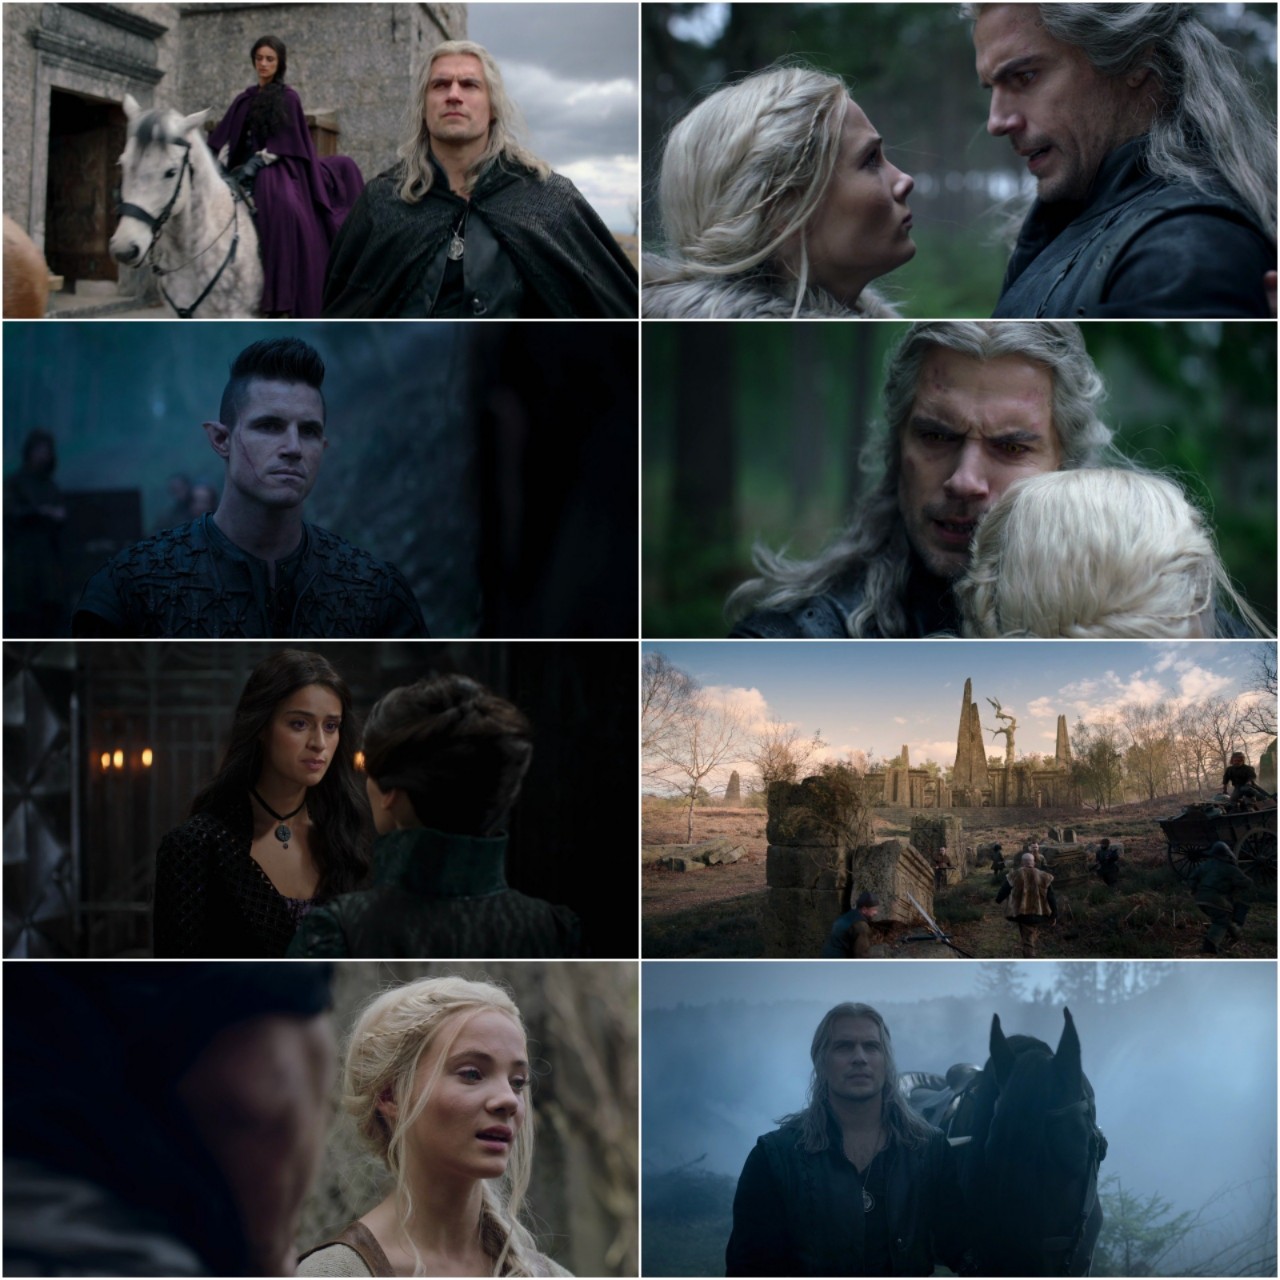  Screenshot Of The-Witcher-Season-3-Part-1-And-2-WEB-DL-Hindi-And-English-1080p-720p-And-480p-All-Episodes-Netflix-Series